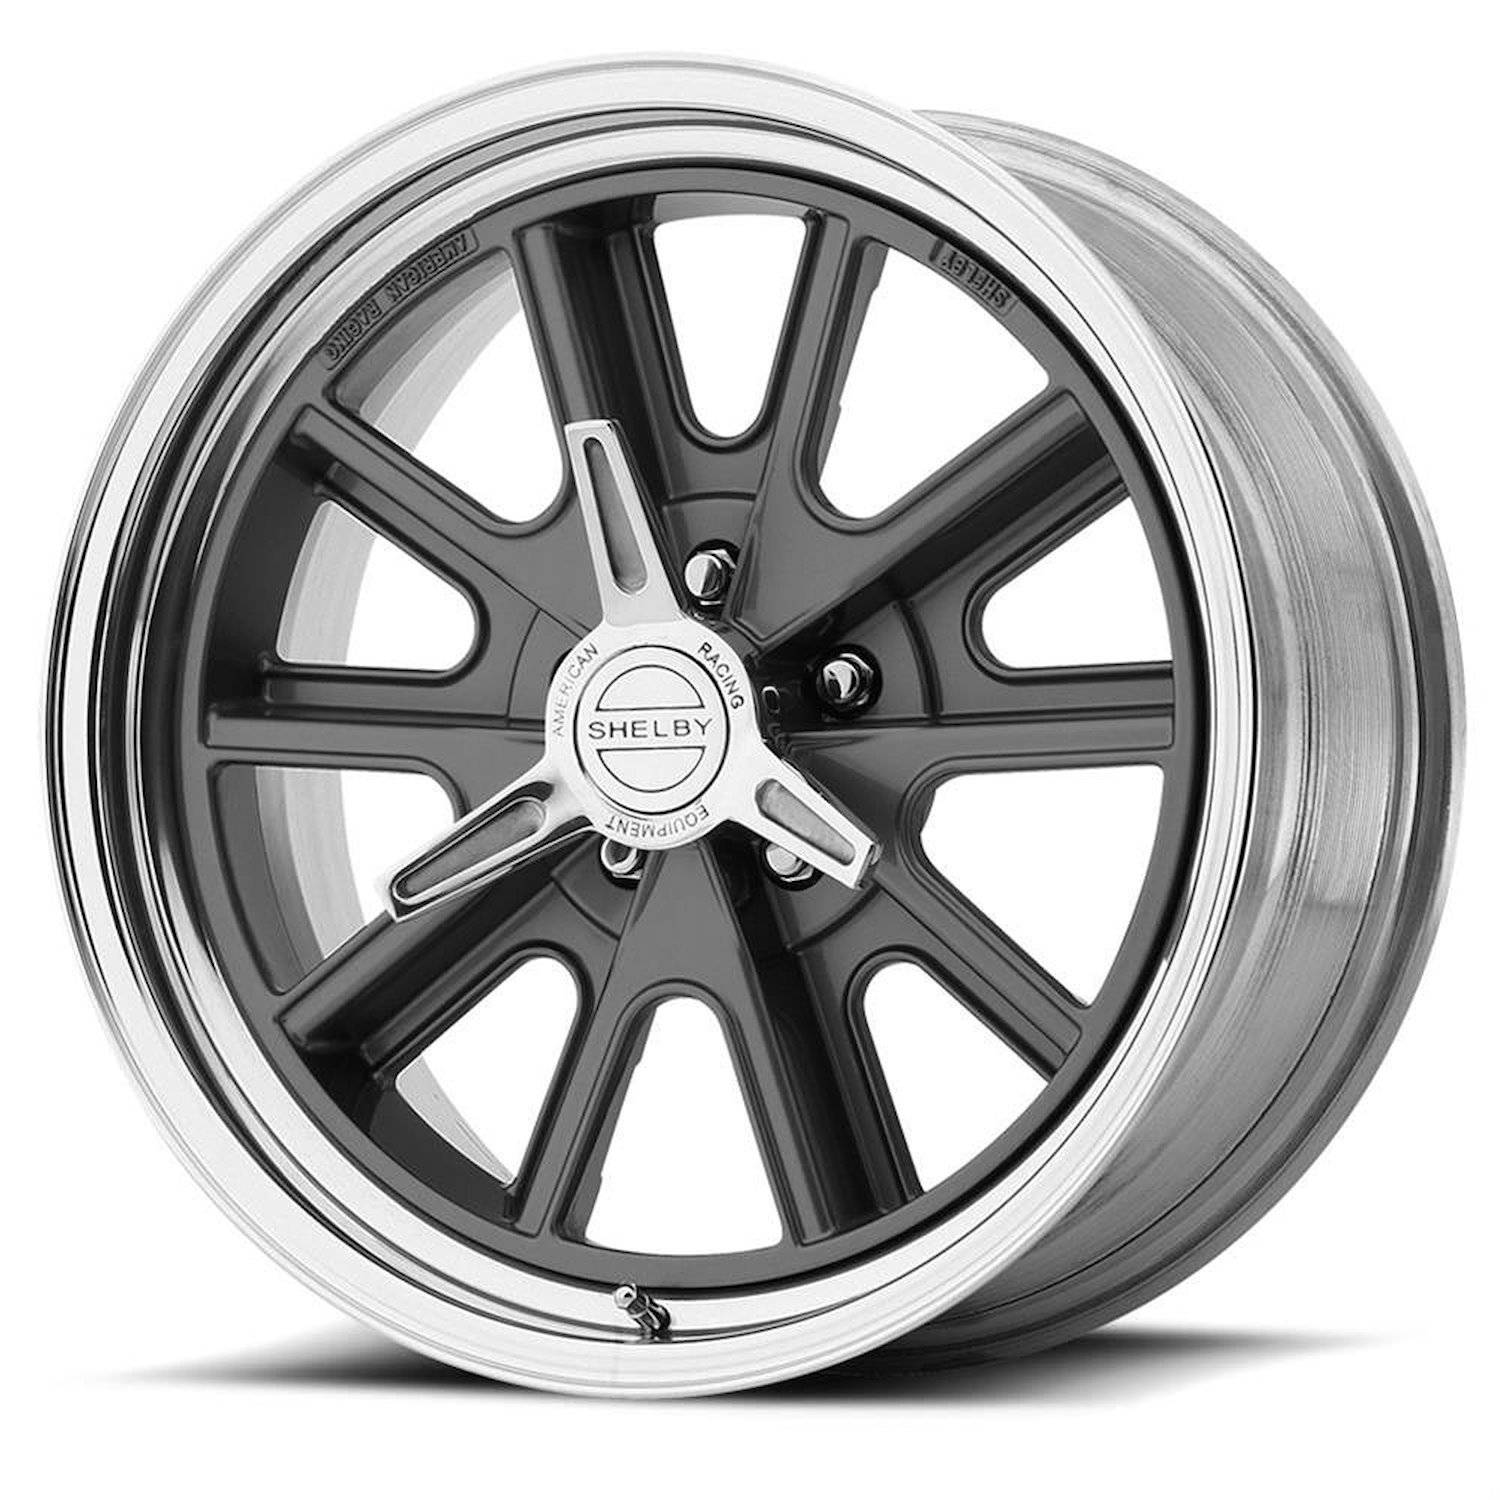 AMERICAN RACING 427 SHELBY COBRA TWO-PIECE MAG GRAY CENTER POLISHED BARREL 17 x 8 5X4.75 0 4.50